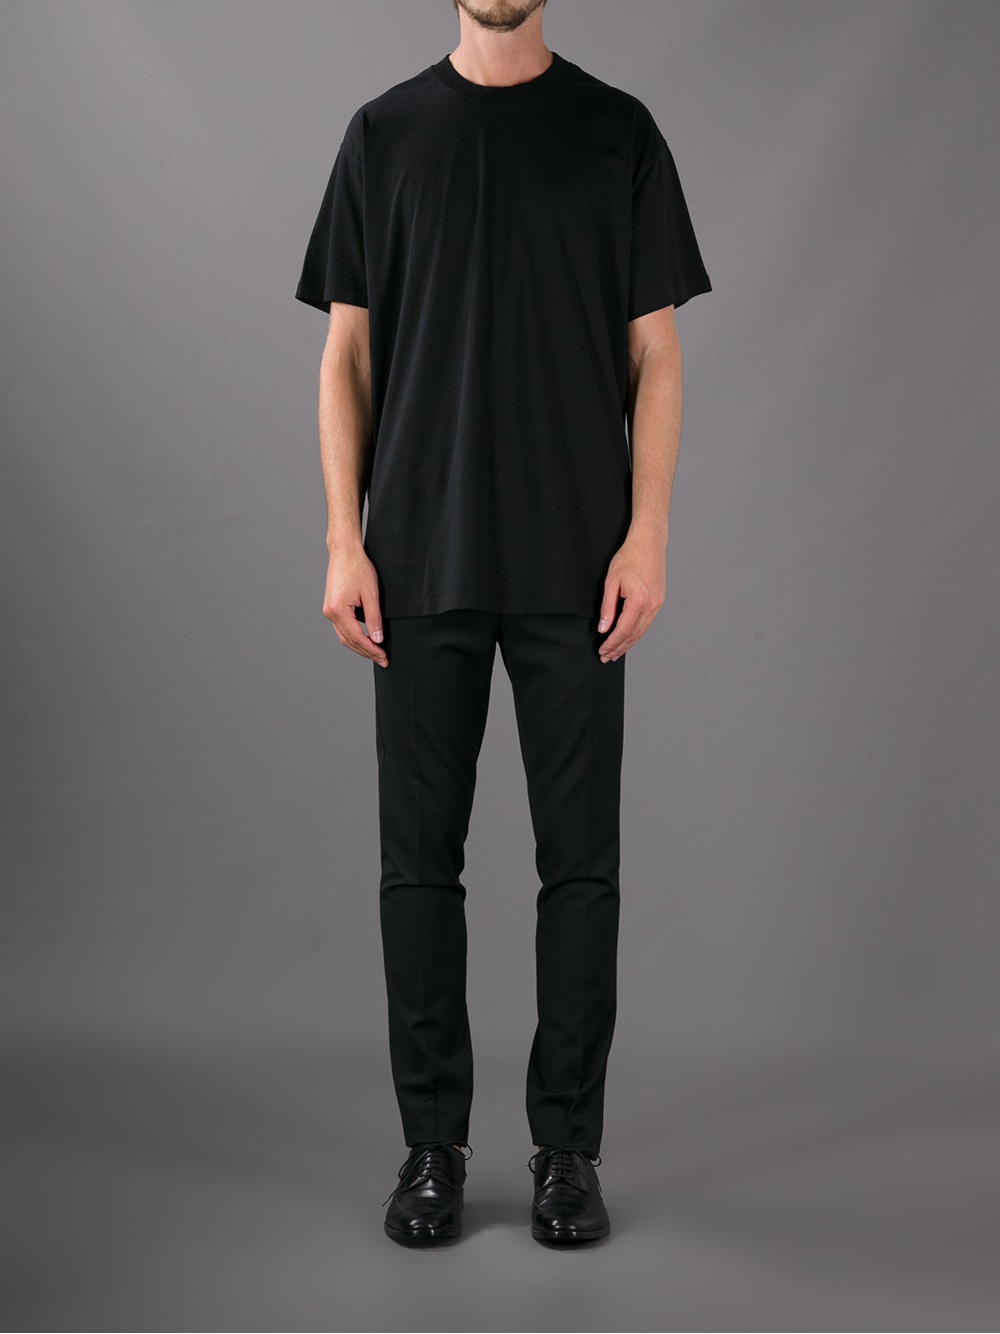 Givenchy Pervert 17 Cotton T-Shirt in Black for Men | Lyst